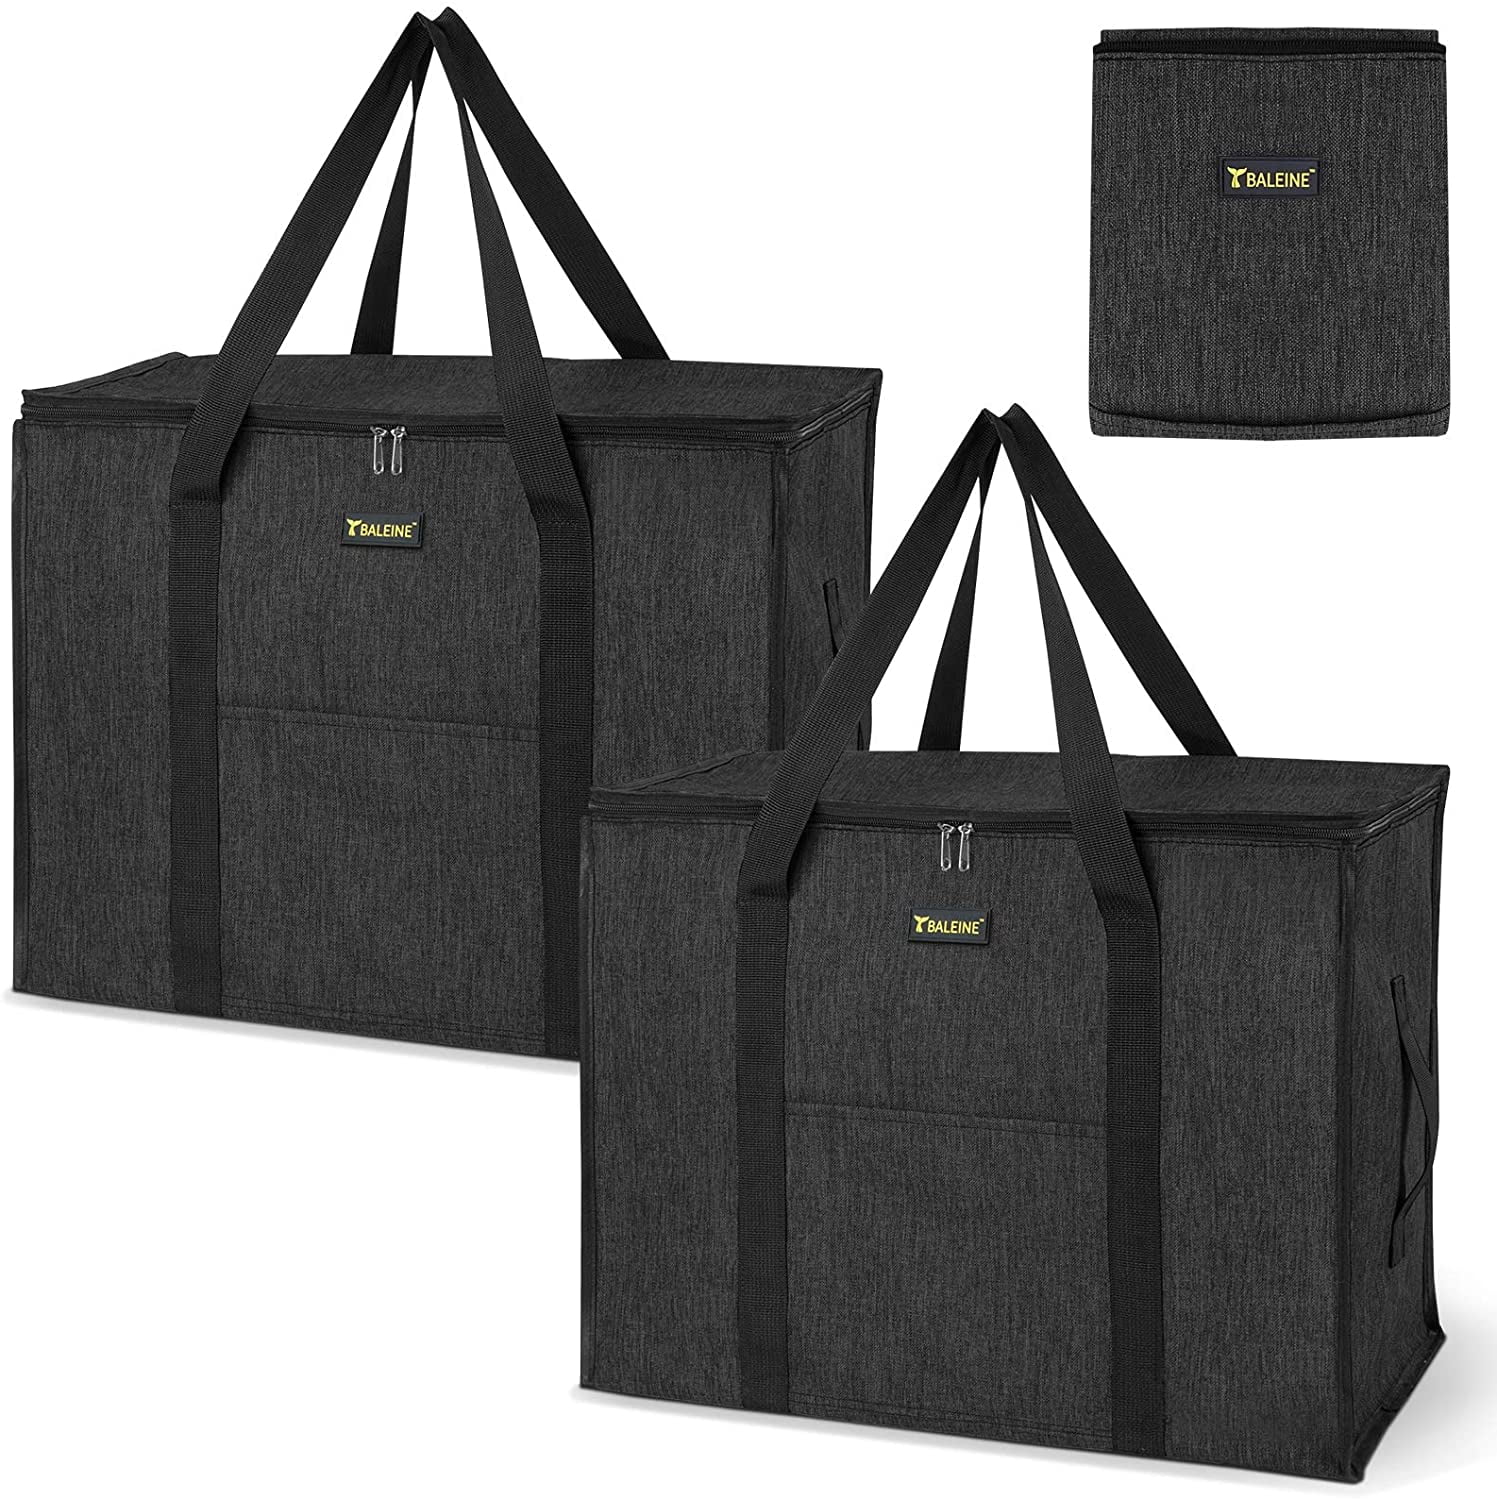 BALEINE 2 Pack Storage Tote with Zippers & Carrying Handles, Heavy-Duty ...